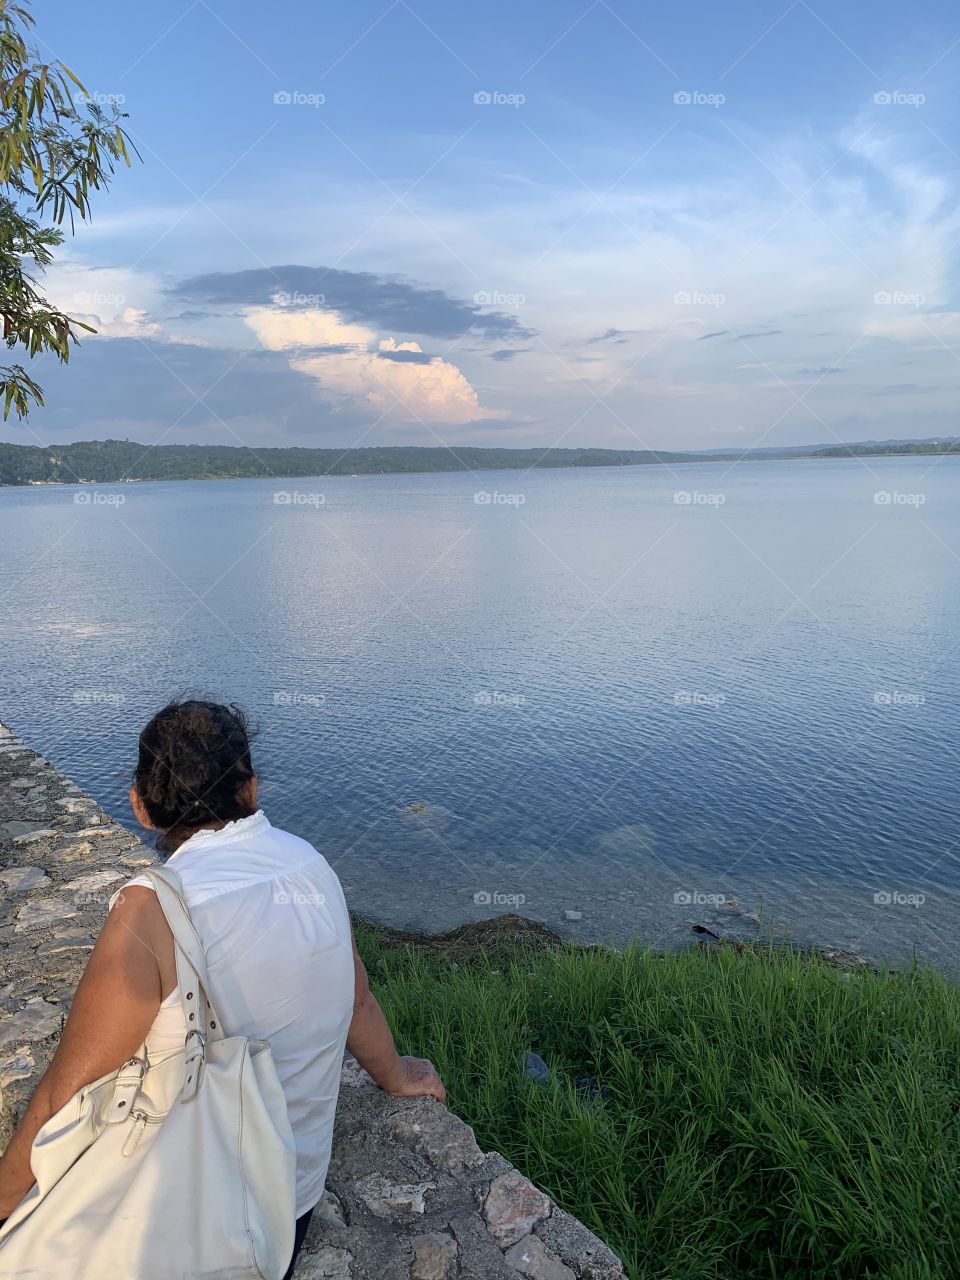 Watching the beauty of the lake 